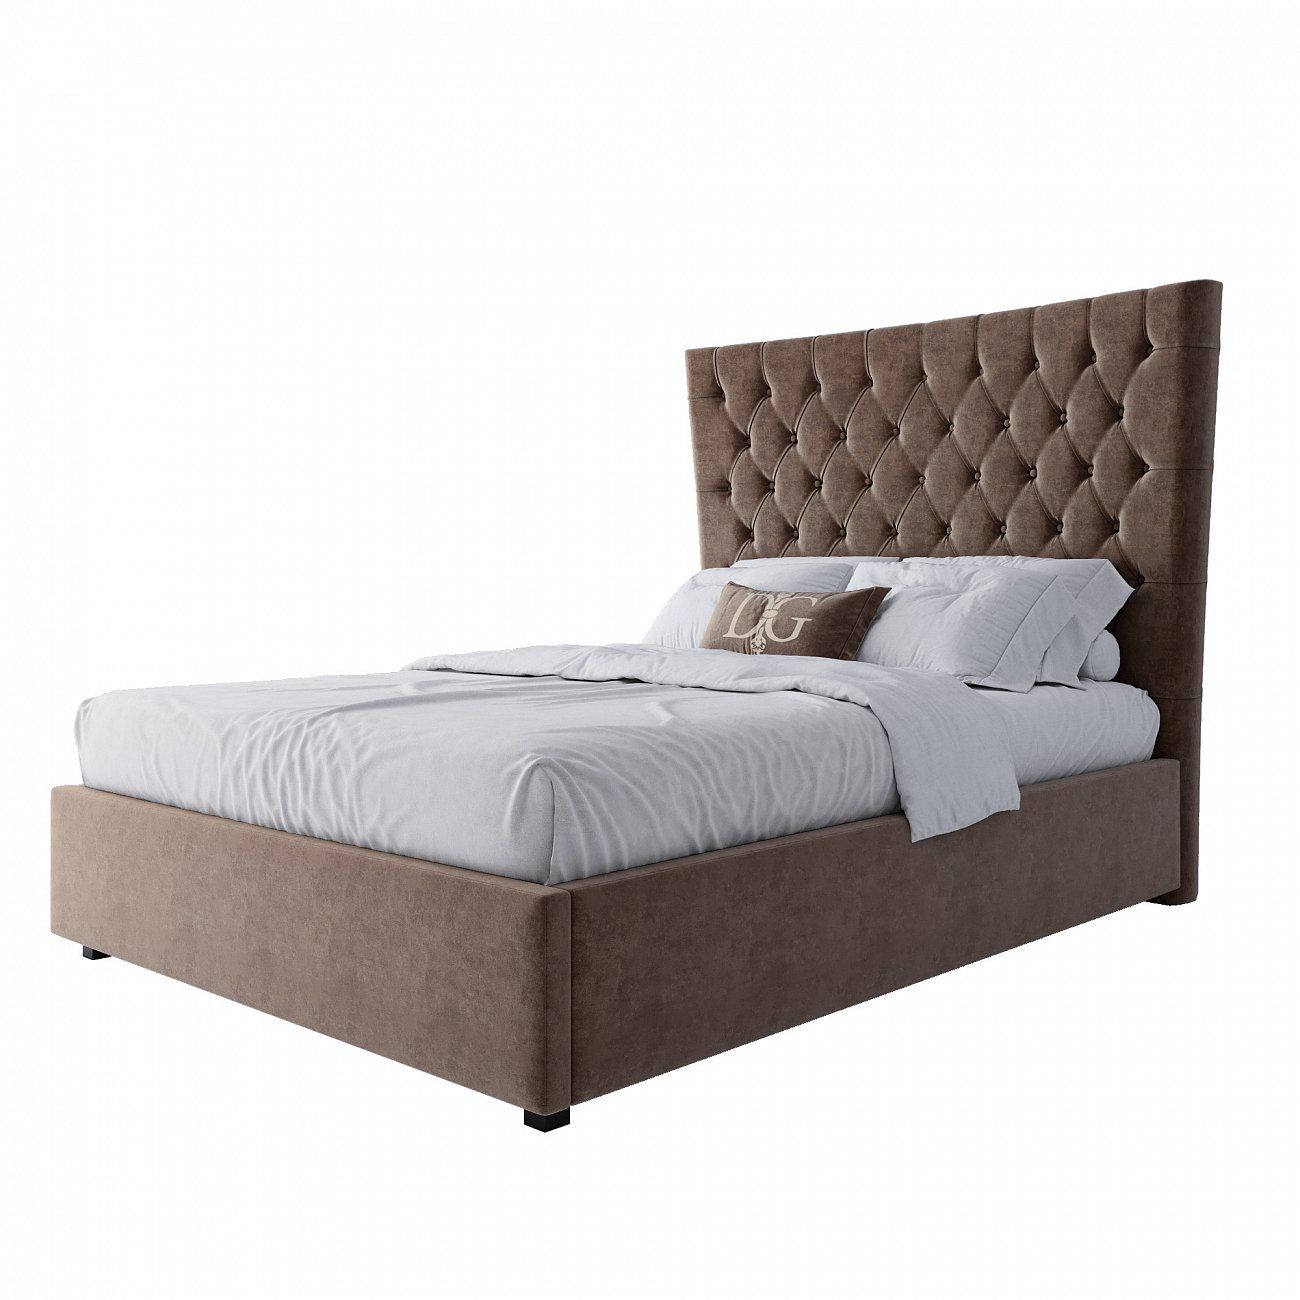 Teenage bed with carriage screed 140x200 grey-brown QuickSand